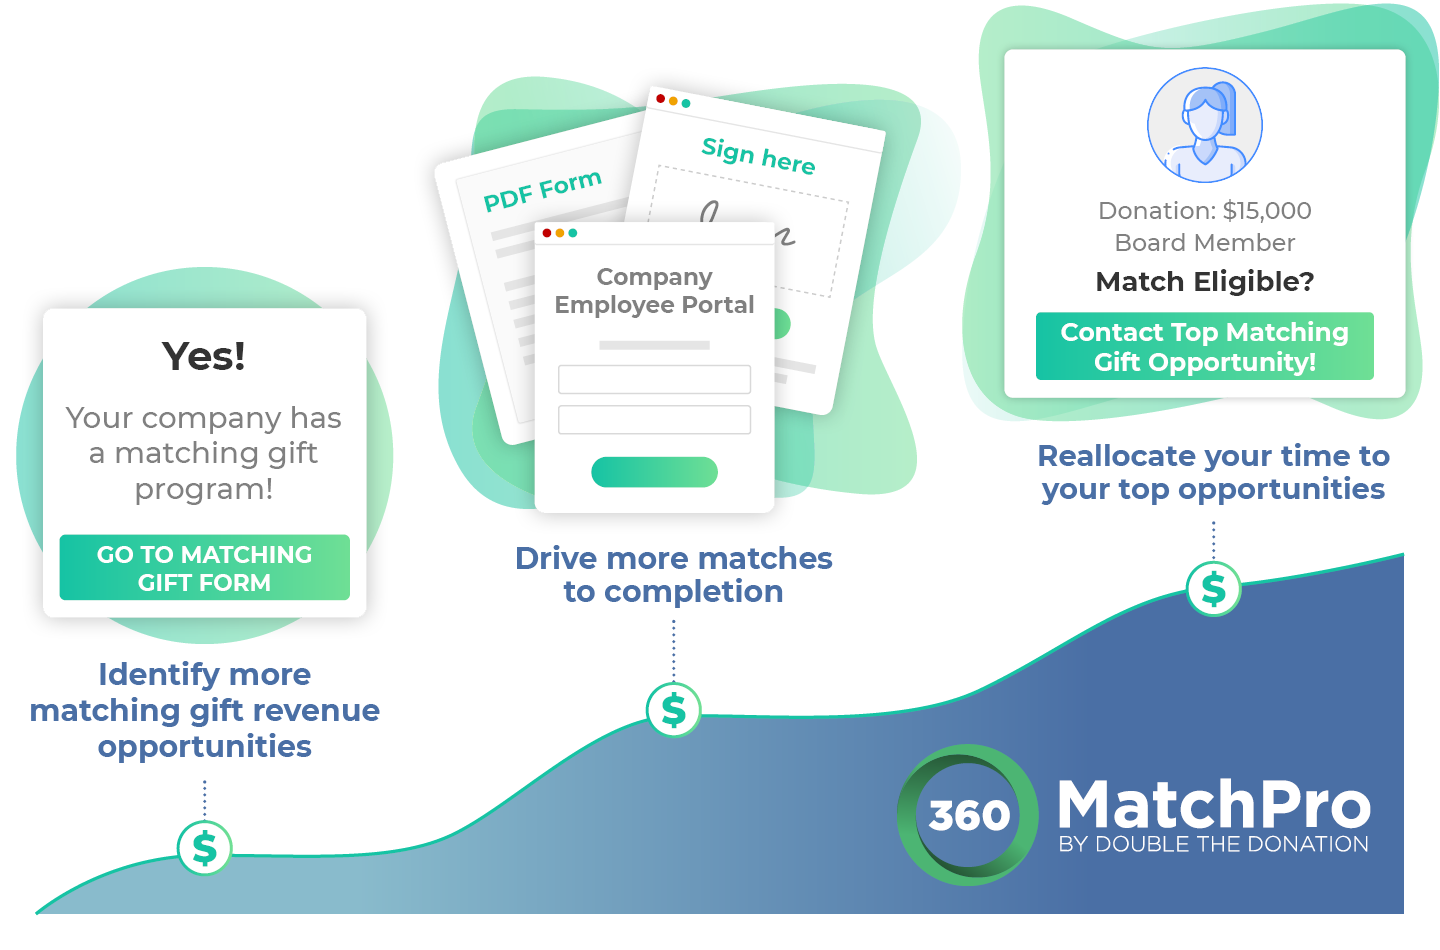 This image shows the abilities of 360MatchPro alongside an increasing graph that is meant to represent increasing donations.